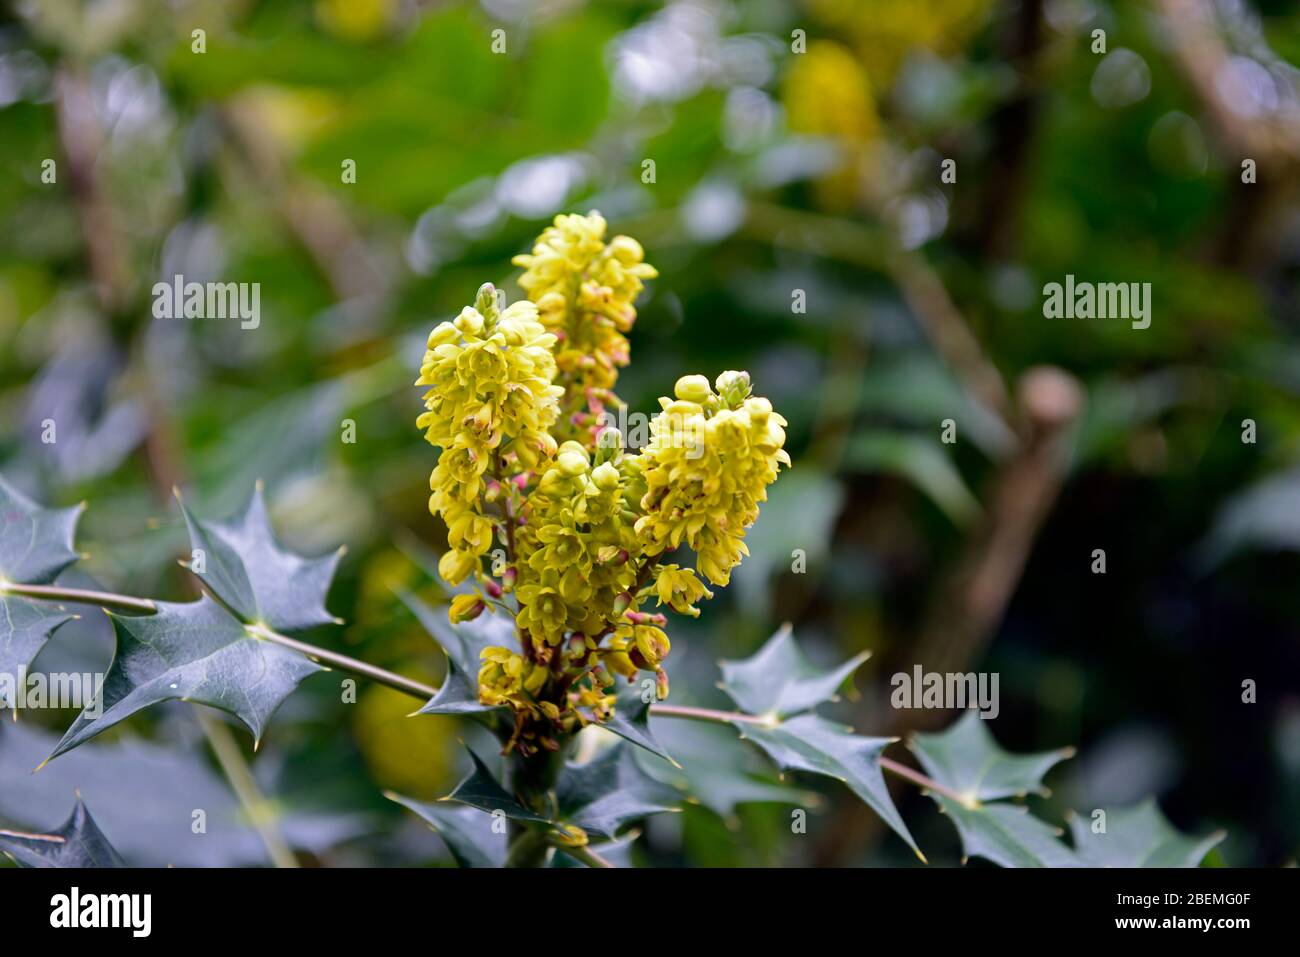 mahonia japonica x napaulensis,yellow flowers,flowering shrubs,evergreen leaves,foliage,scented,fragrant,spring garden,RM Floral Stock Photo